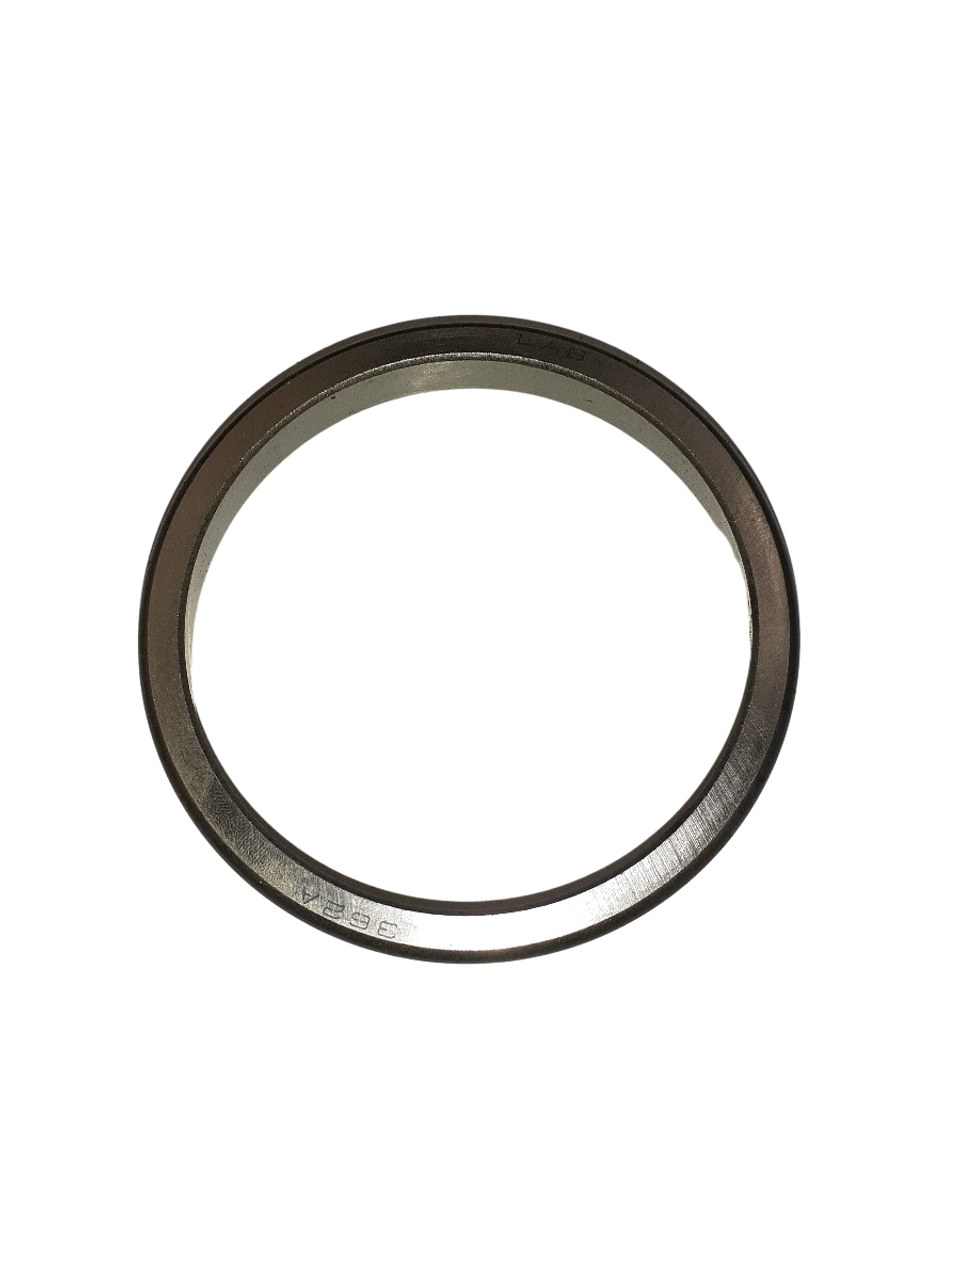 BEARING RACE (CUP) 362A (75-440-A)